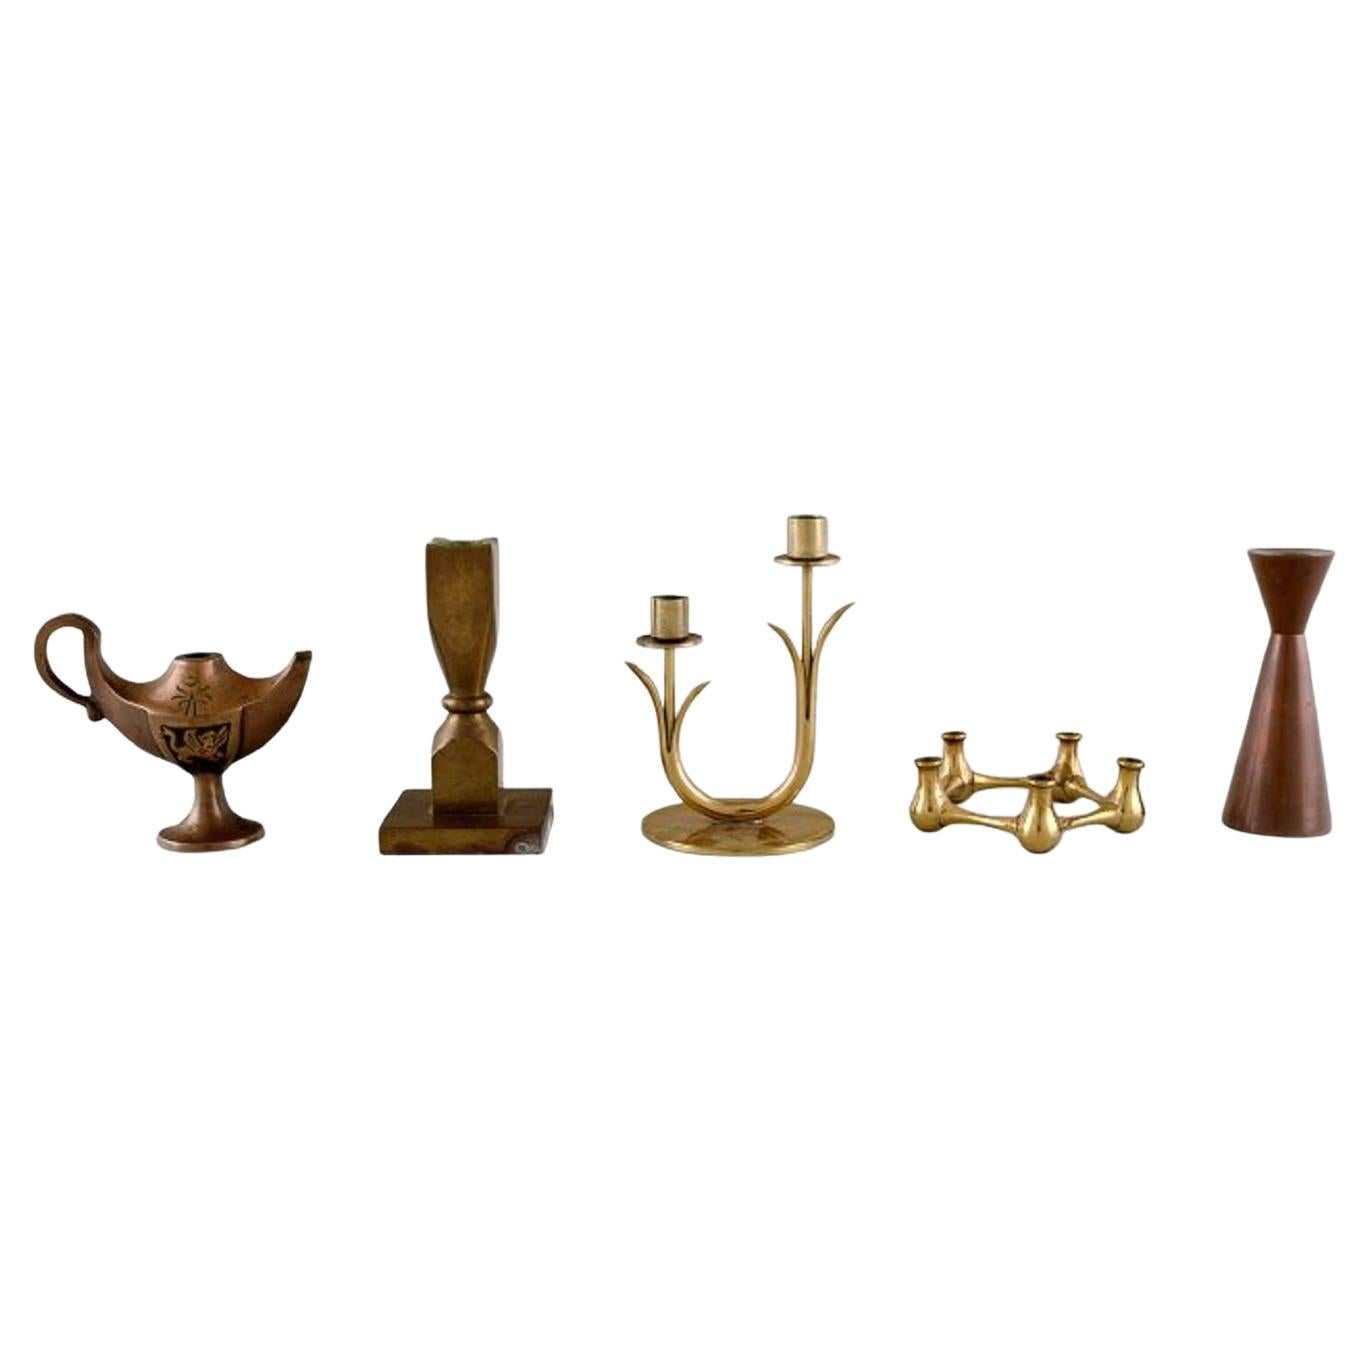 Quistgaard, Gusum, Ystad Metall Et Al, Oil Lamp and Four Candlesticks in Brass For Sale